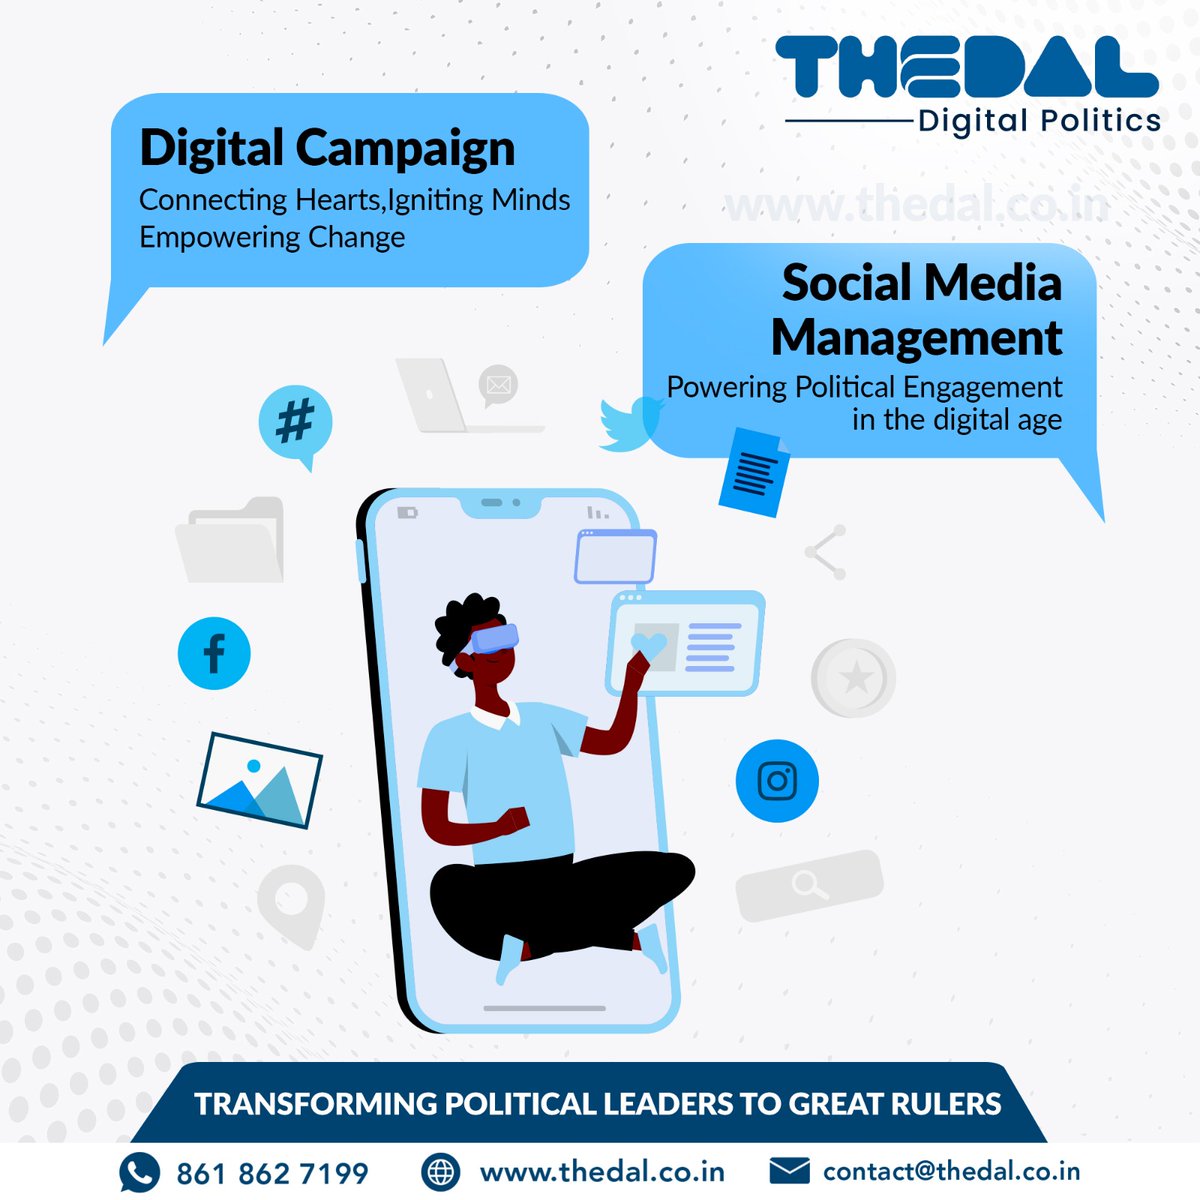 Digital politics on social media platforms revolutionizes advocacy, enabling real-time conversations and mobilizing communities towards meaningful change.
#DigitalPolitics | #Thedal | #TeamApp | #VoiceApp | #Blupage | #Addons | #Services | #DigitalCampaign | #EngageAndEmpower |